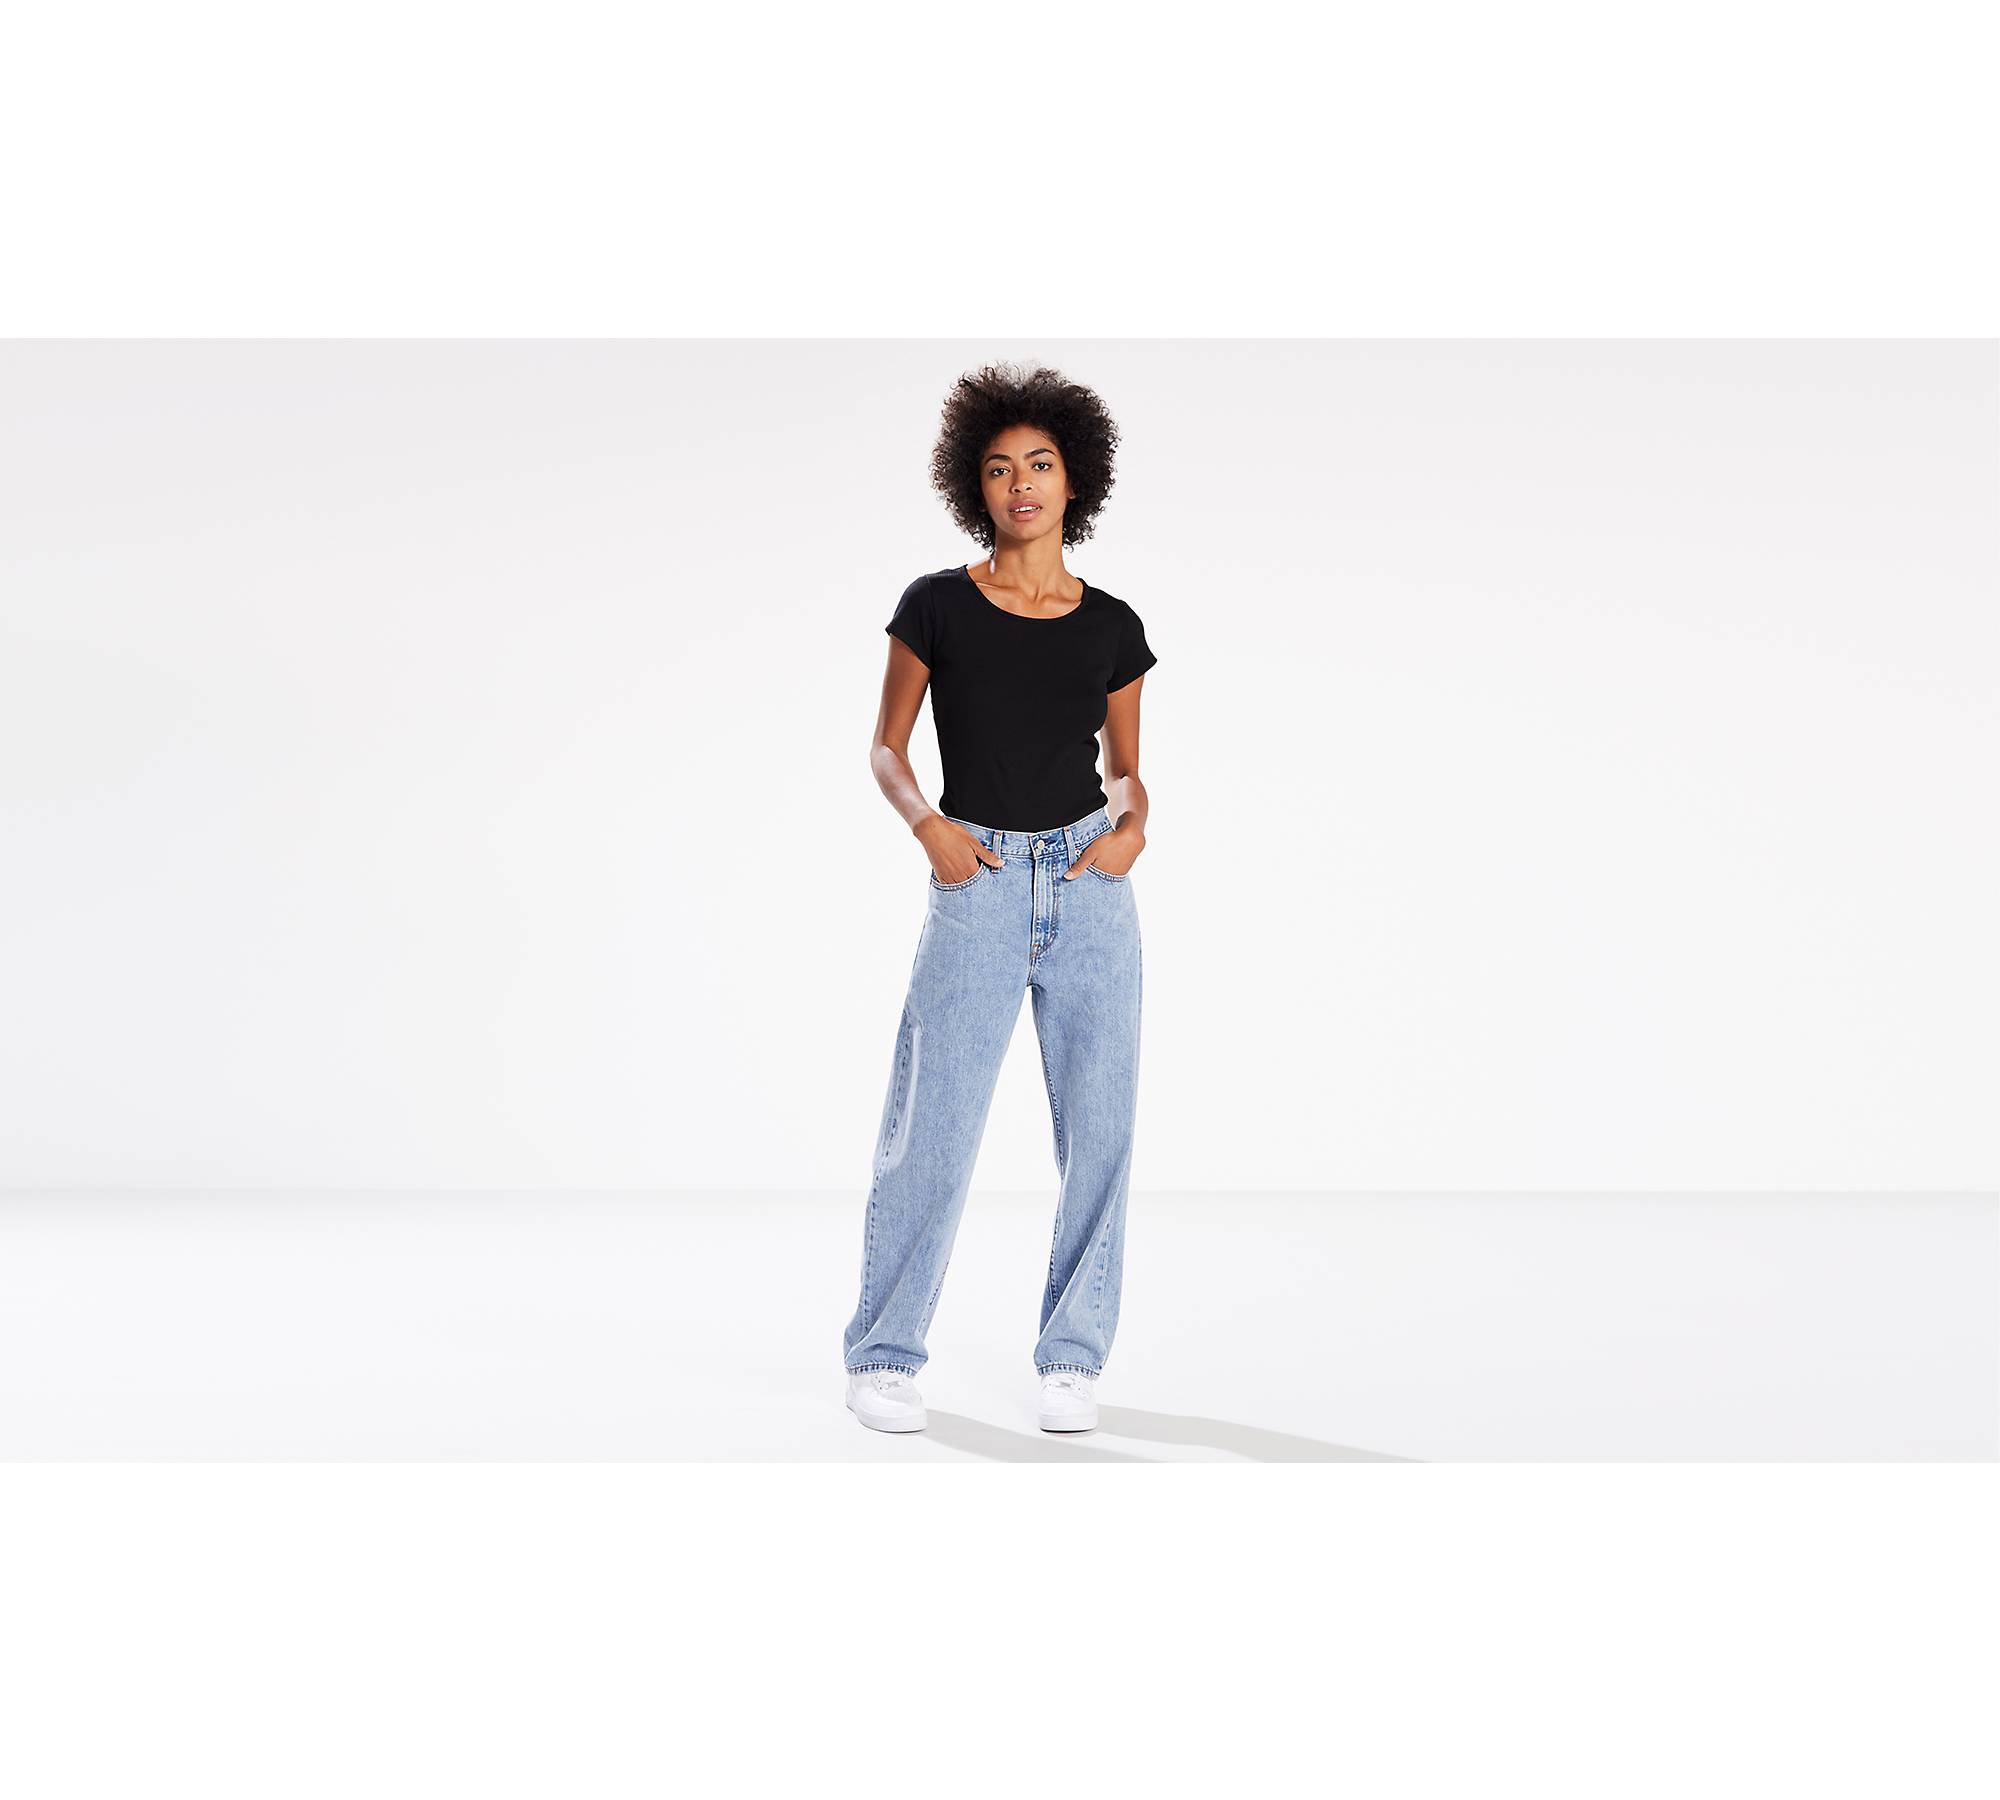 90s Baggy Jeans, Women's Loose Jeans Fit Guide